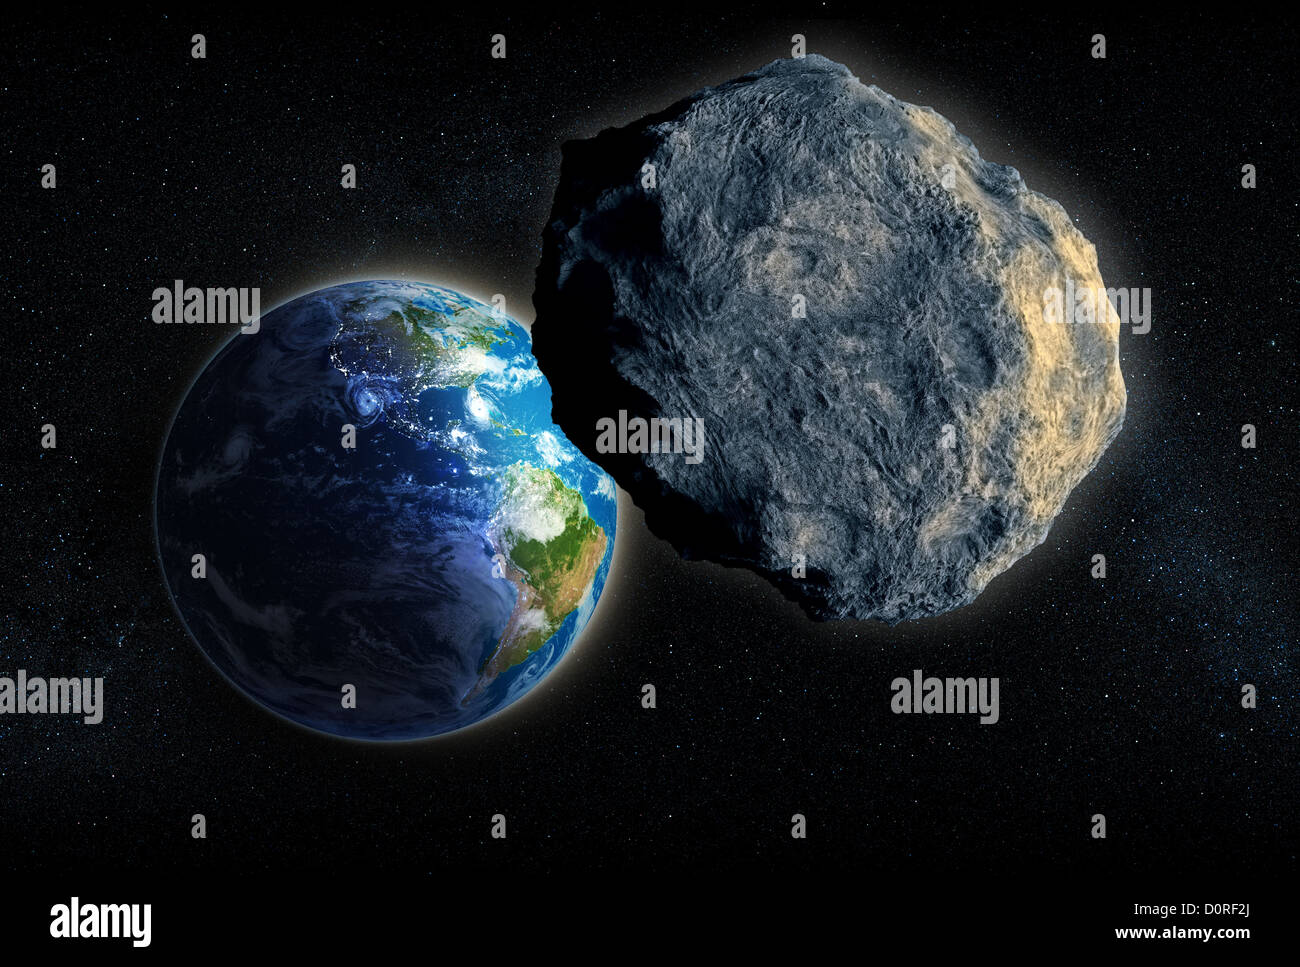 Large Asteroid closing in on Earth Stock Photo